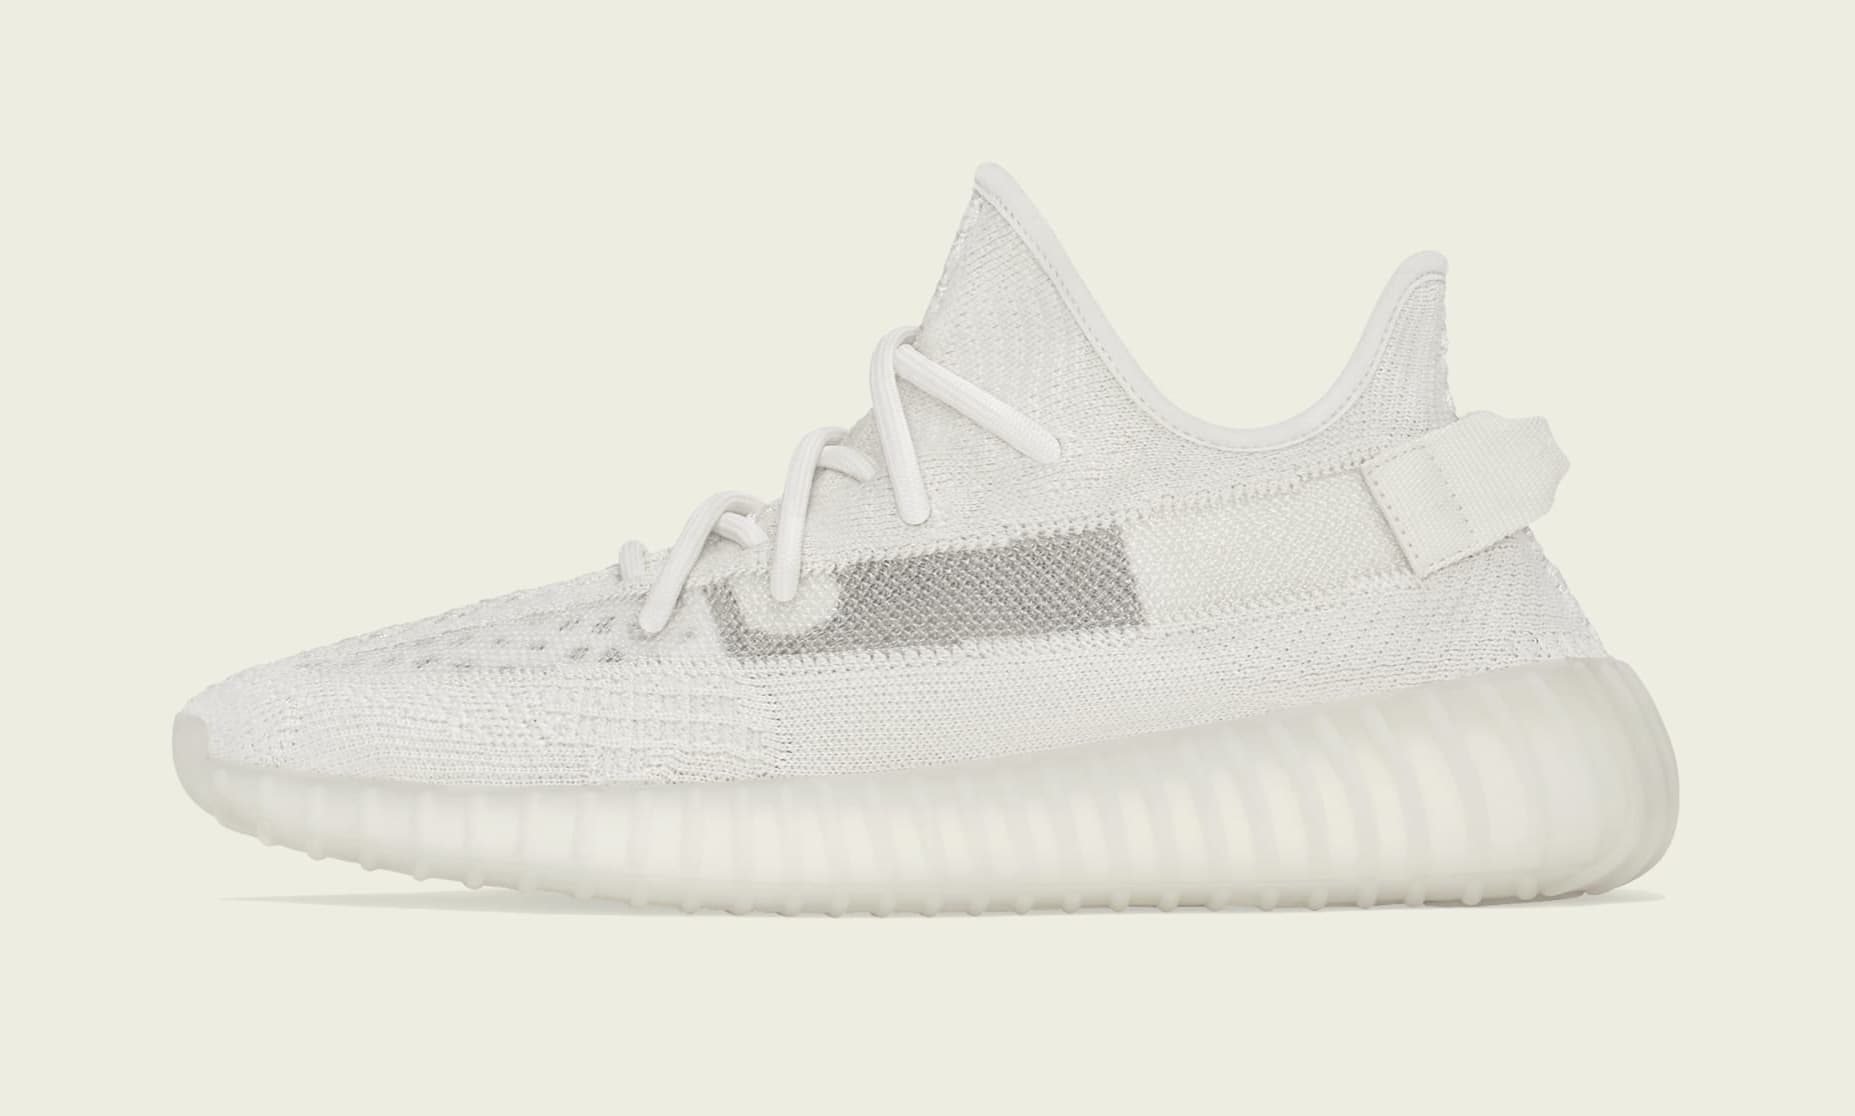 The Adidas Yeezy Boost V2 'Bone' Is Complex